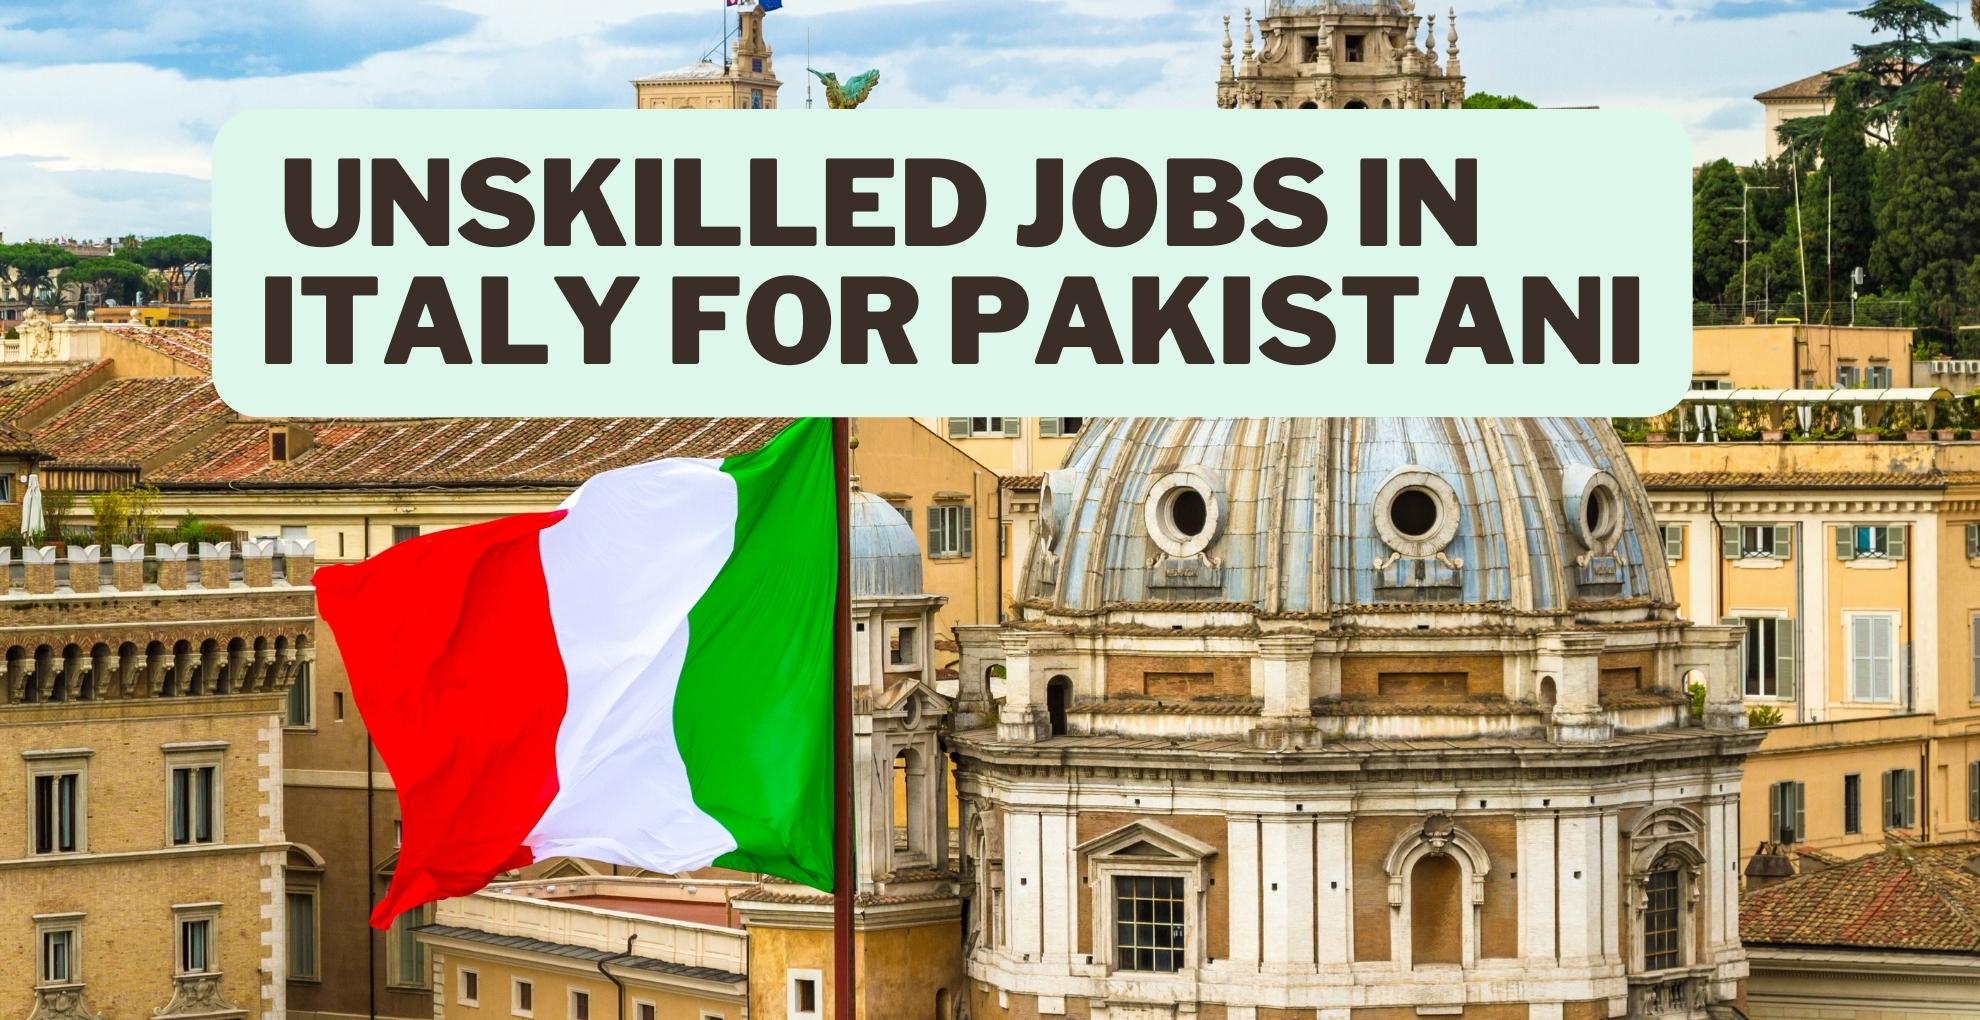 unskilled jobs in Italy for Pakistani